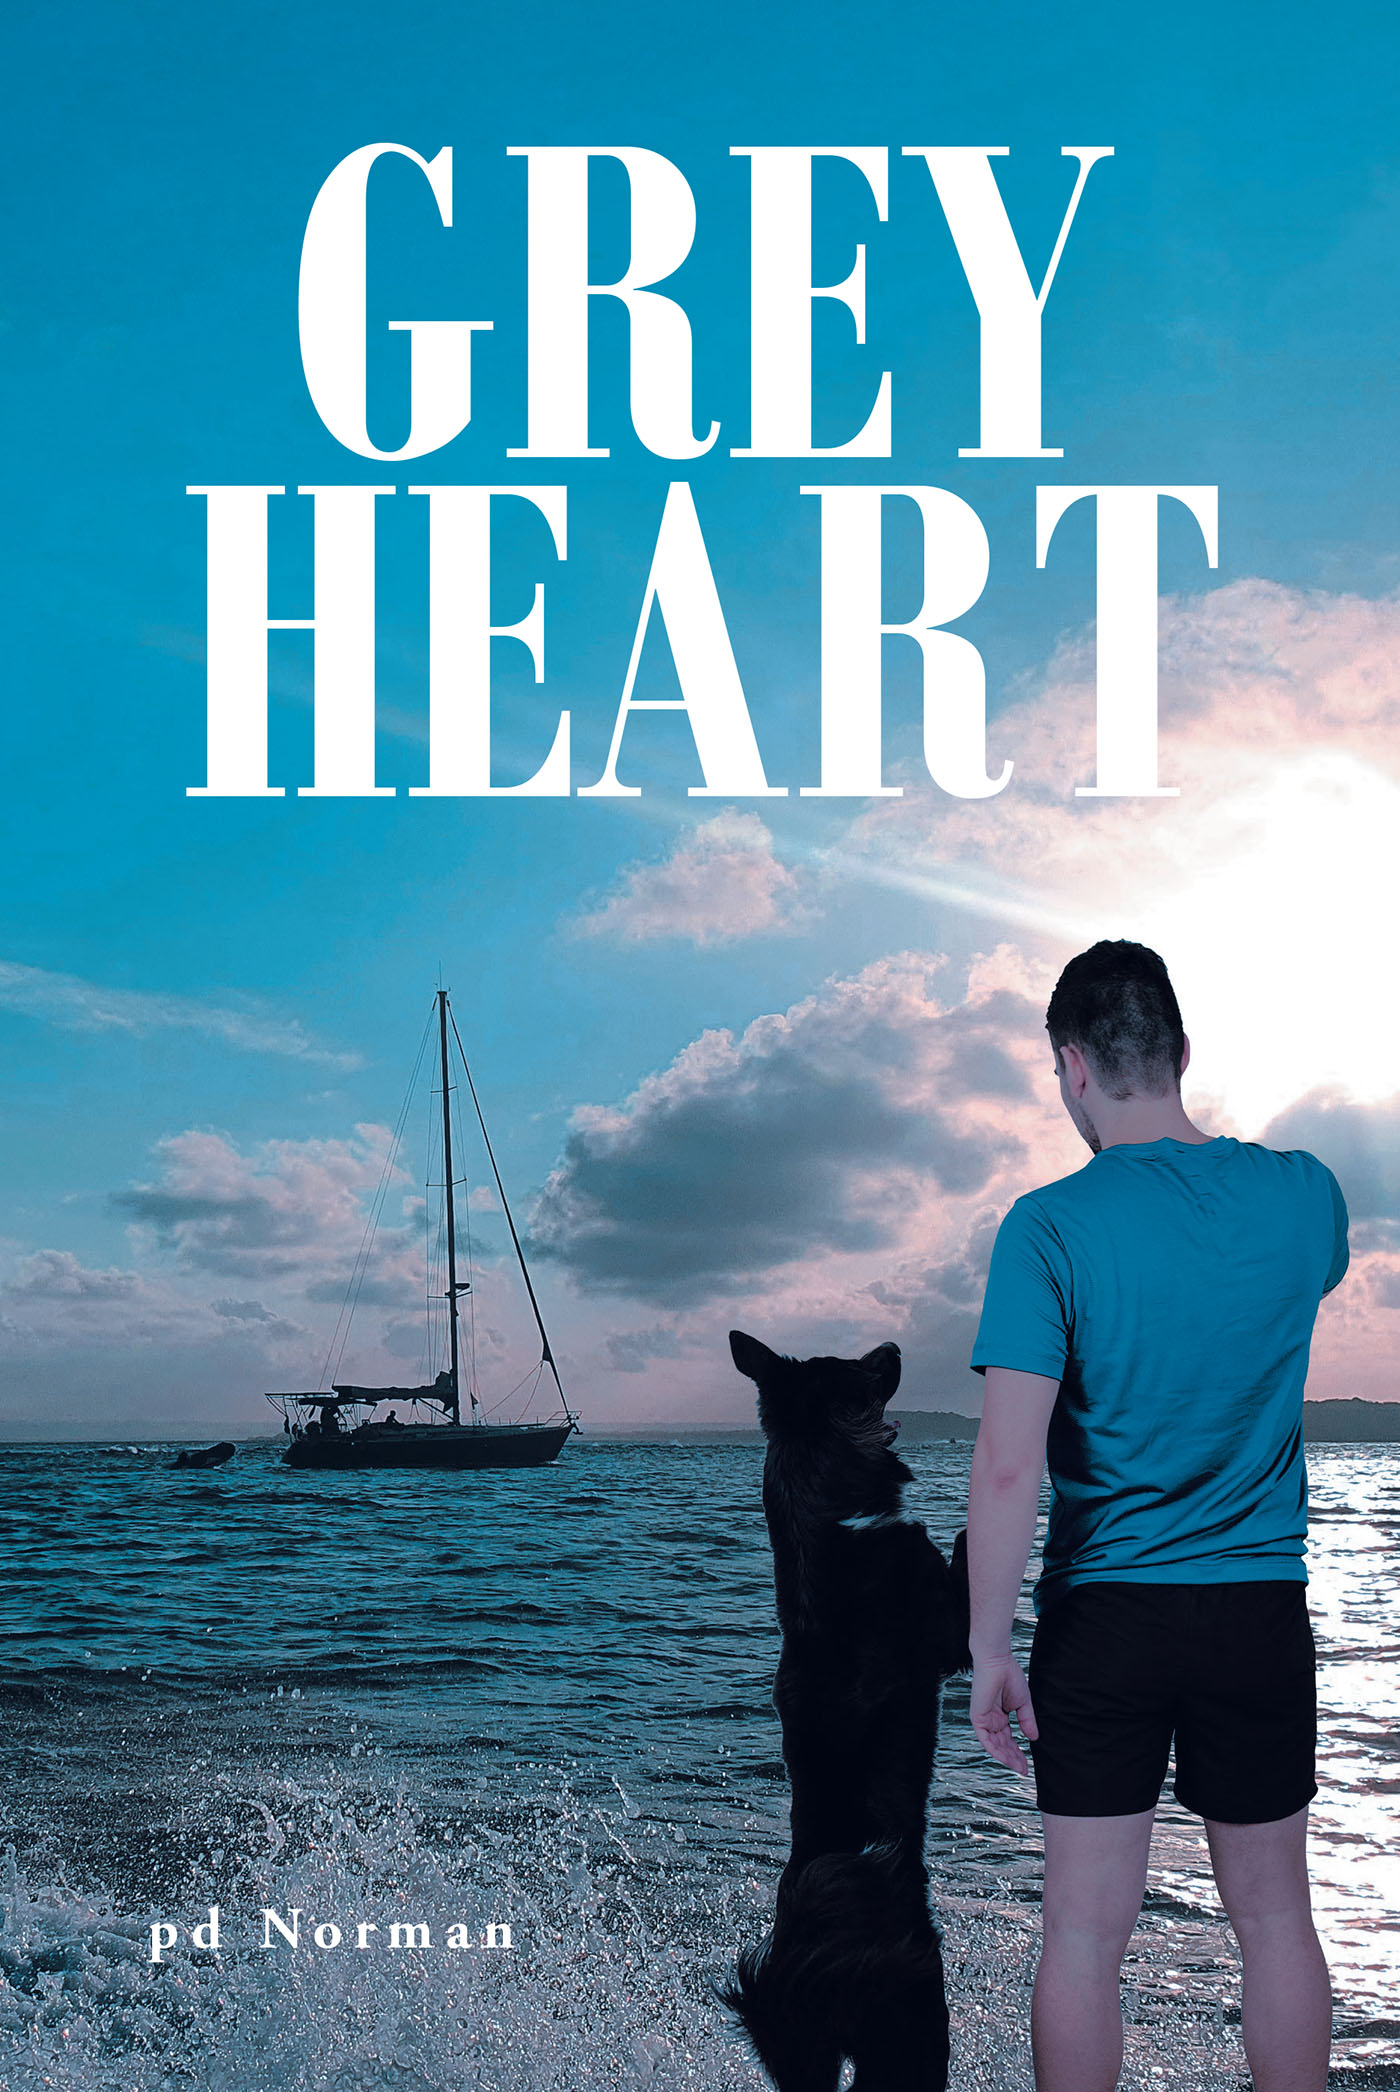 pd Norman’s New Book, “Grey Heart,” Centers Around an Archeologist with a Special Gift Who Must Work to Figure Out the Truth About Her Past & Who Attacked Her Mother